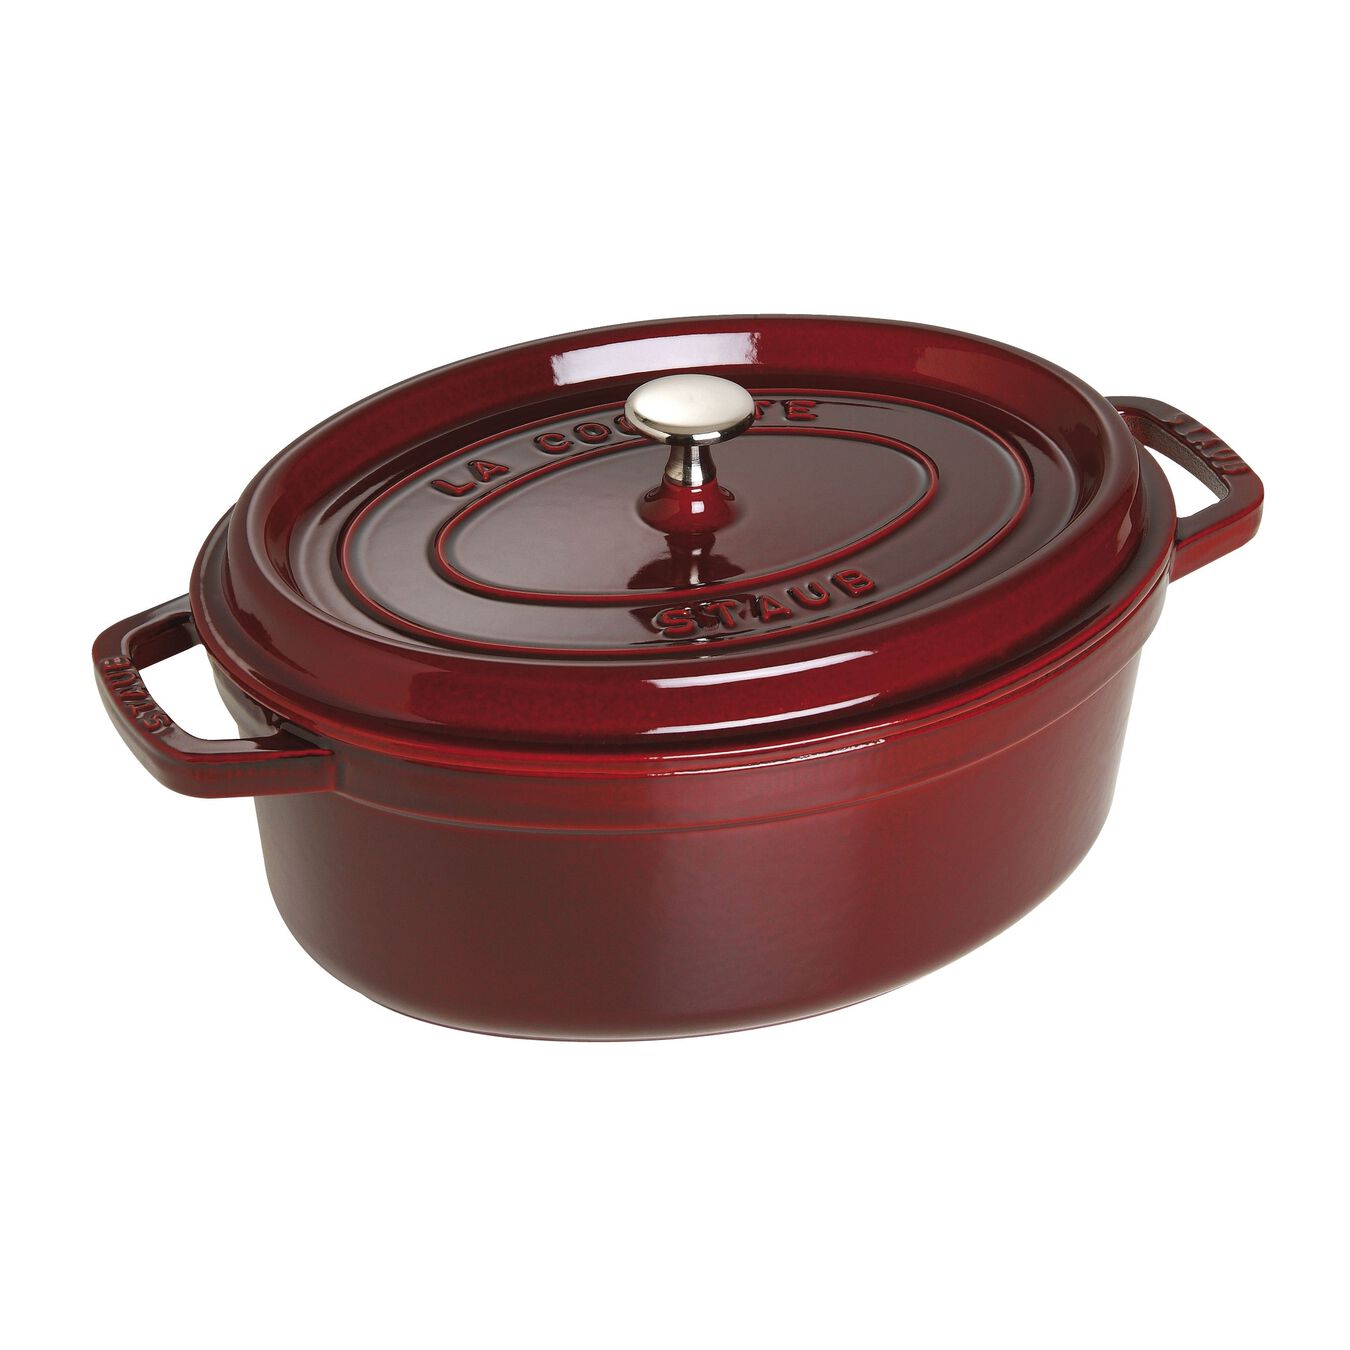 Cocotte 29 cm, oval, Grenadine-Rot, Gusseisen,,large 2